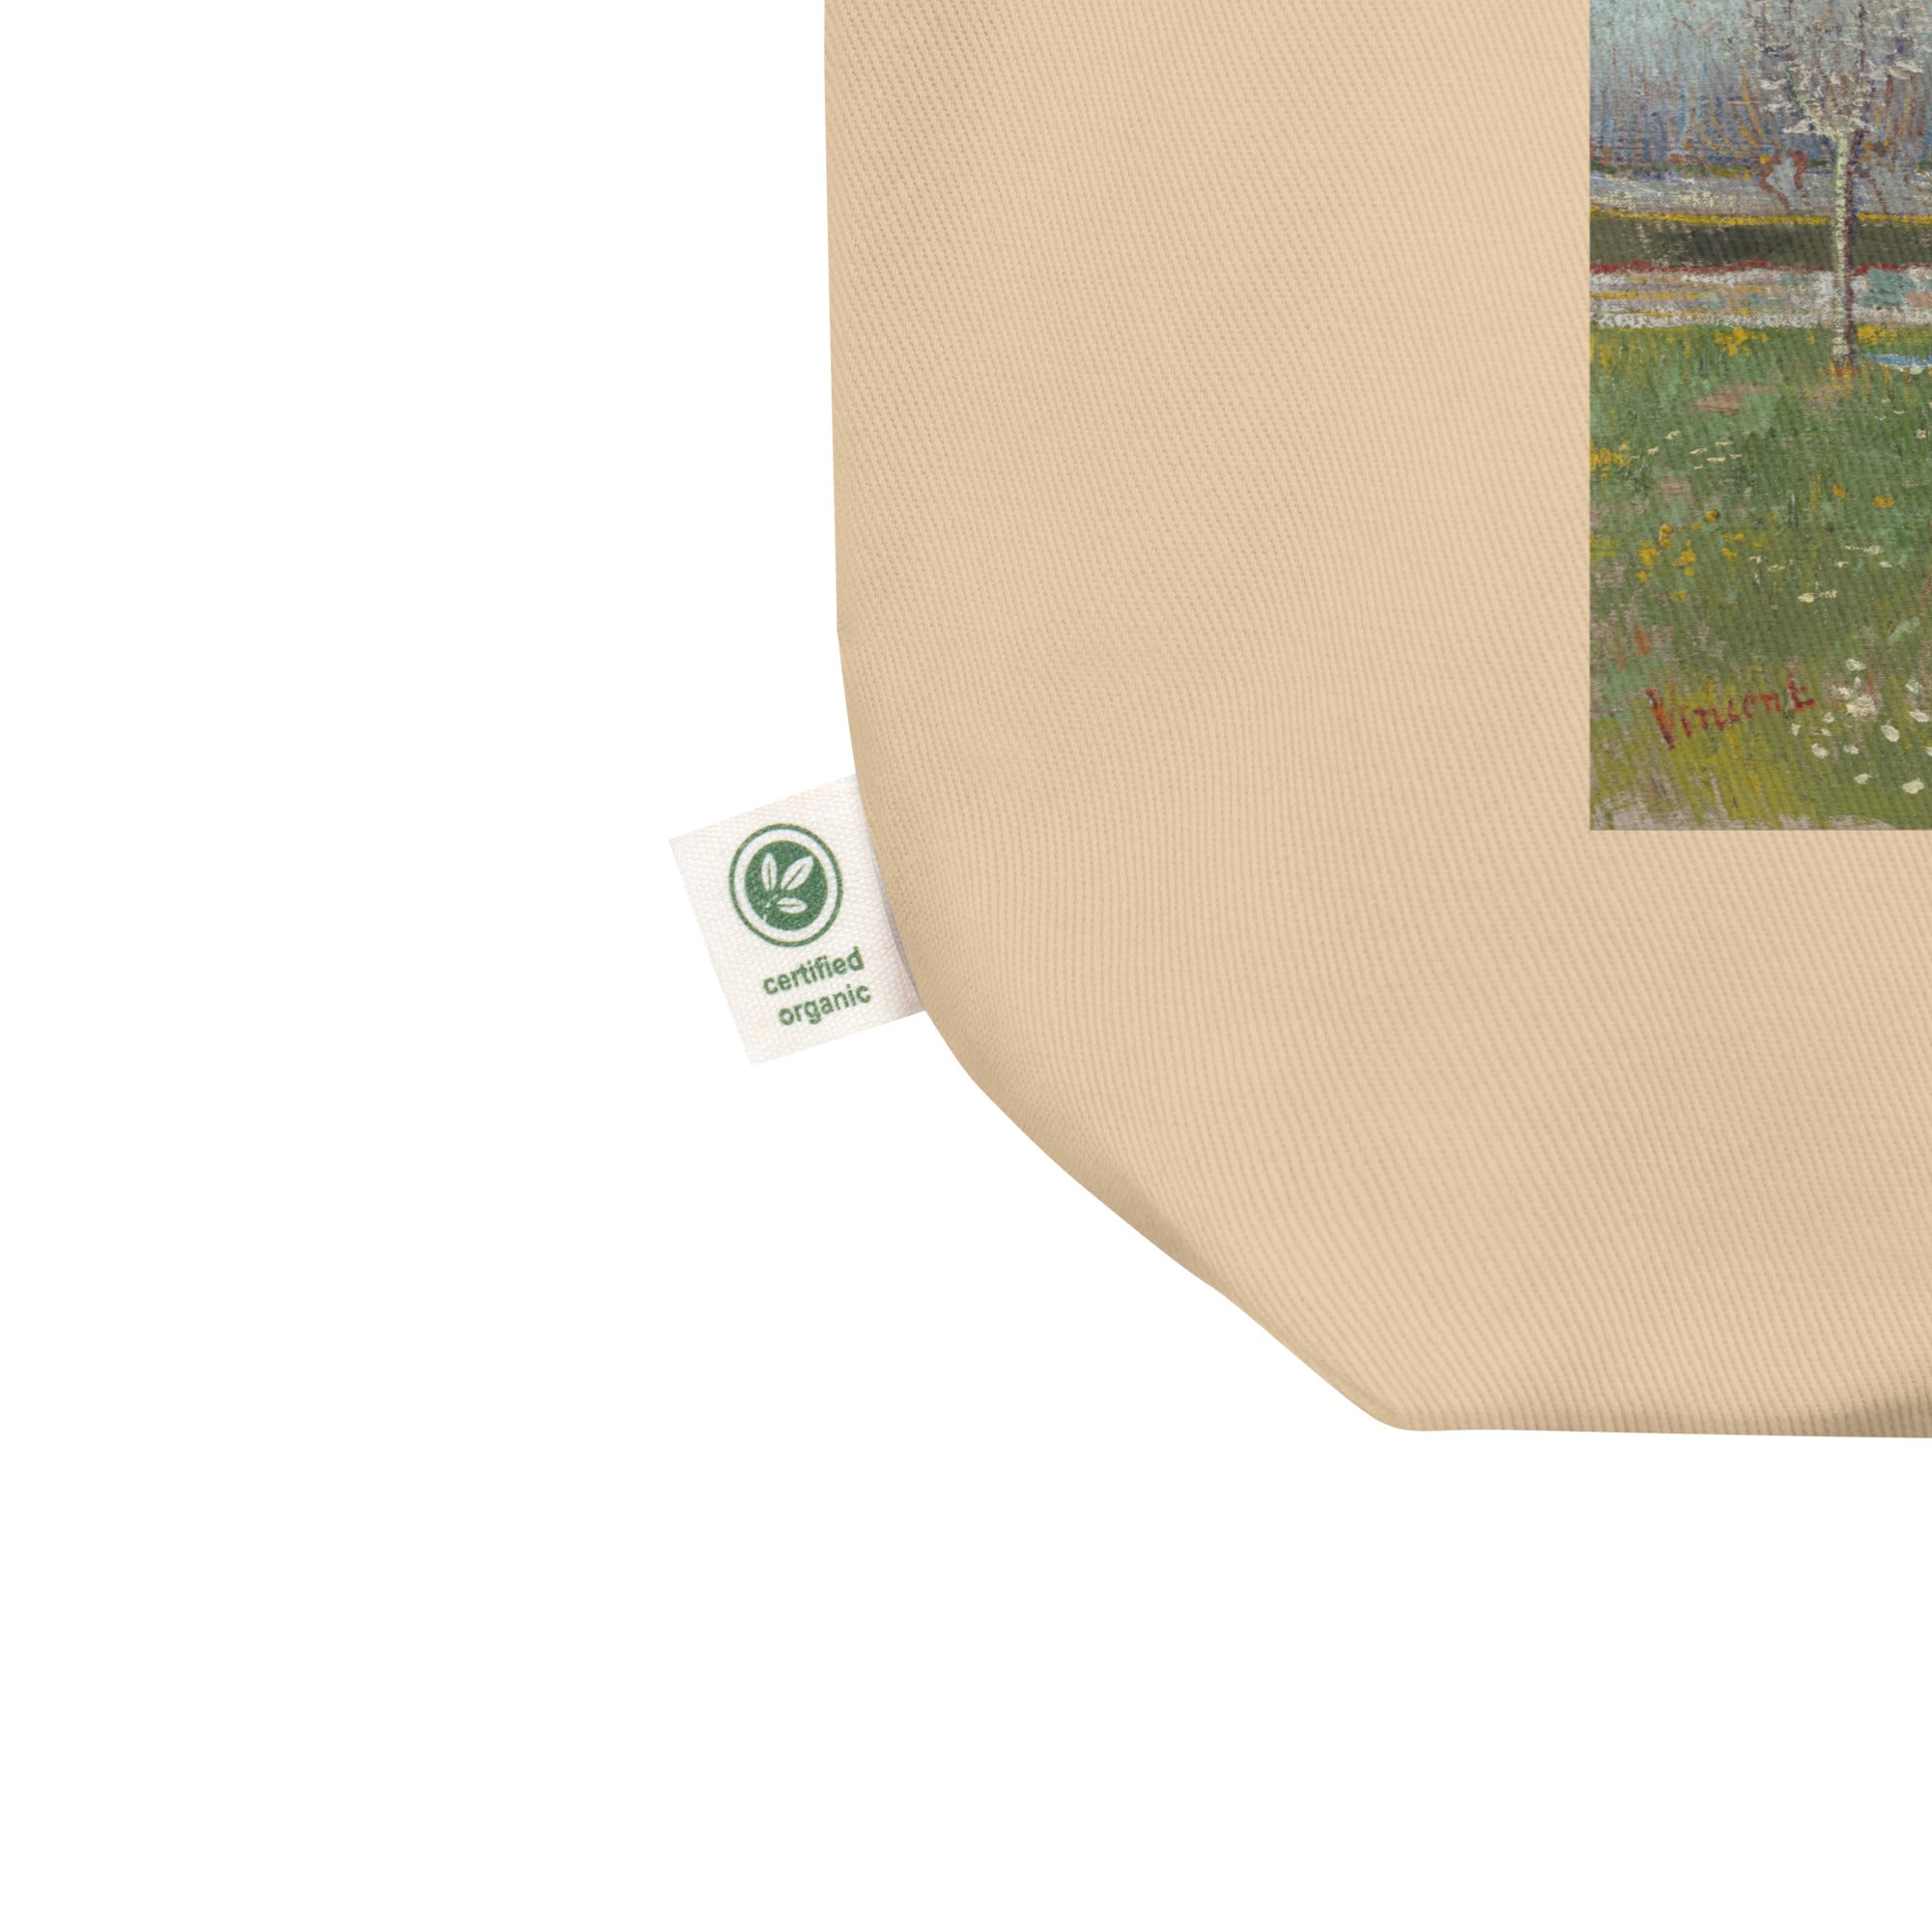 Vincent van Gogh 'Orchard in Blossom' Famous Painting Totebag | Eco Friendly Art Tote Bag